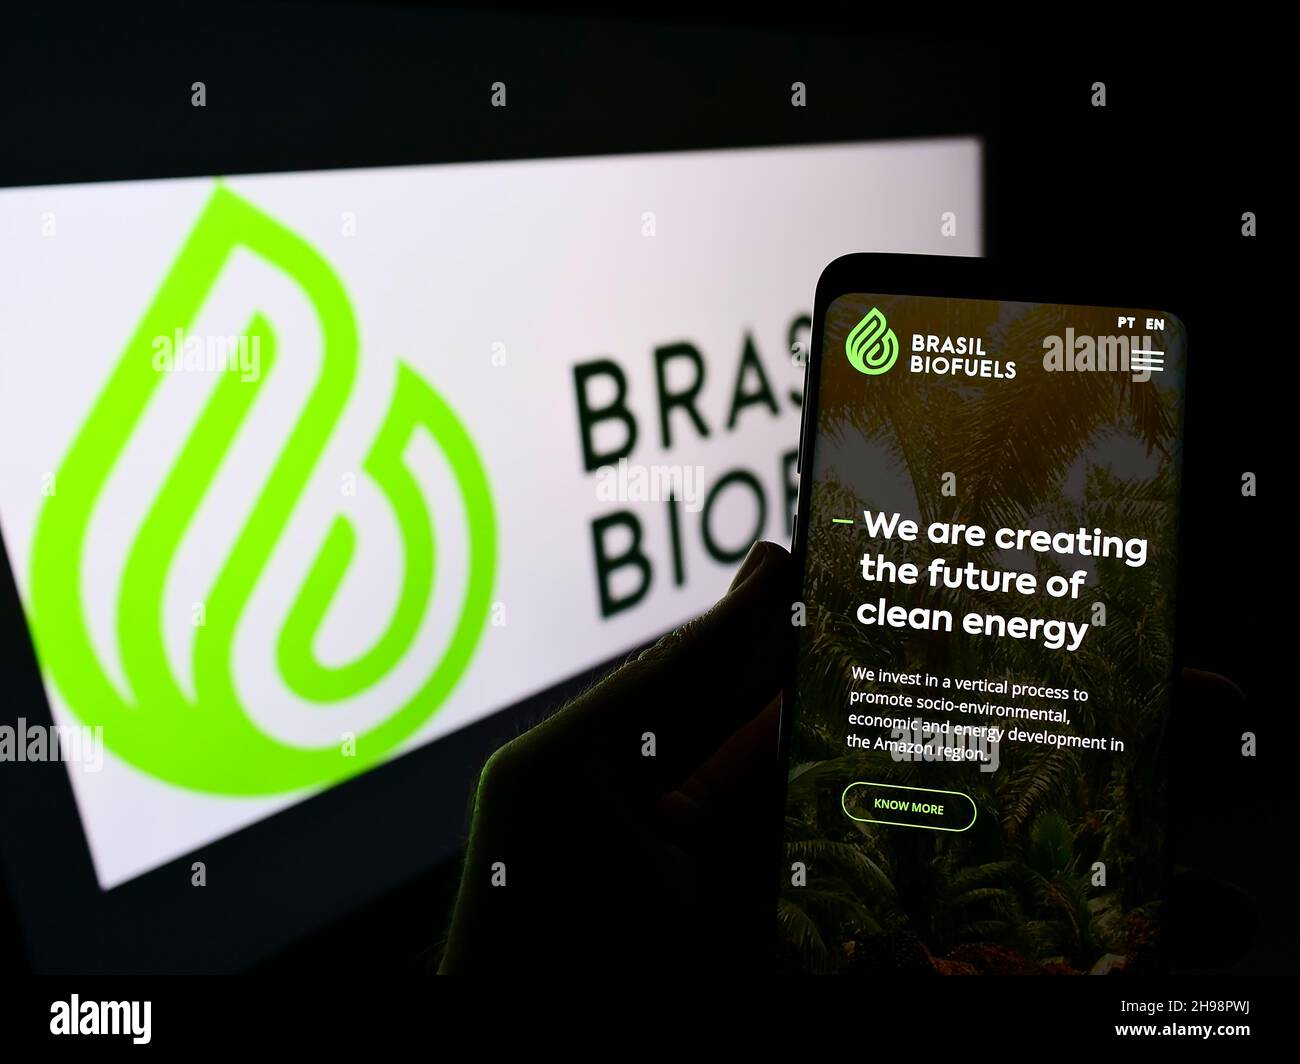 Person holding cellphone with webpage of company BBF Brasil Bio Fuels S.A. (BioFuels) on screen in front of logo. Focus on center of phone display. Stock Photo